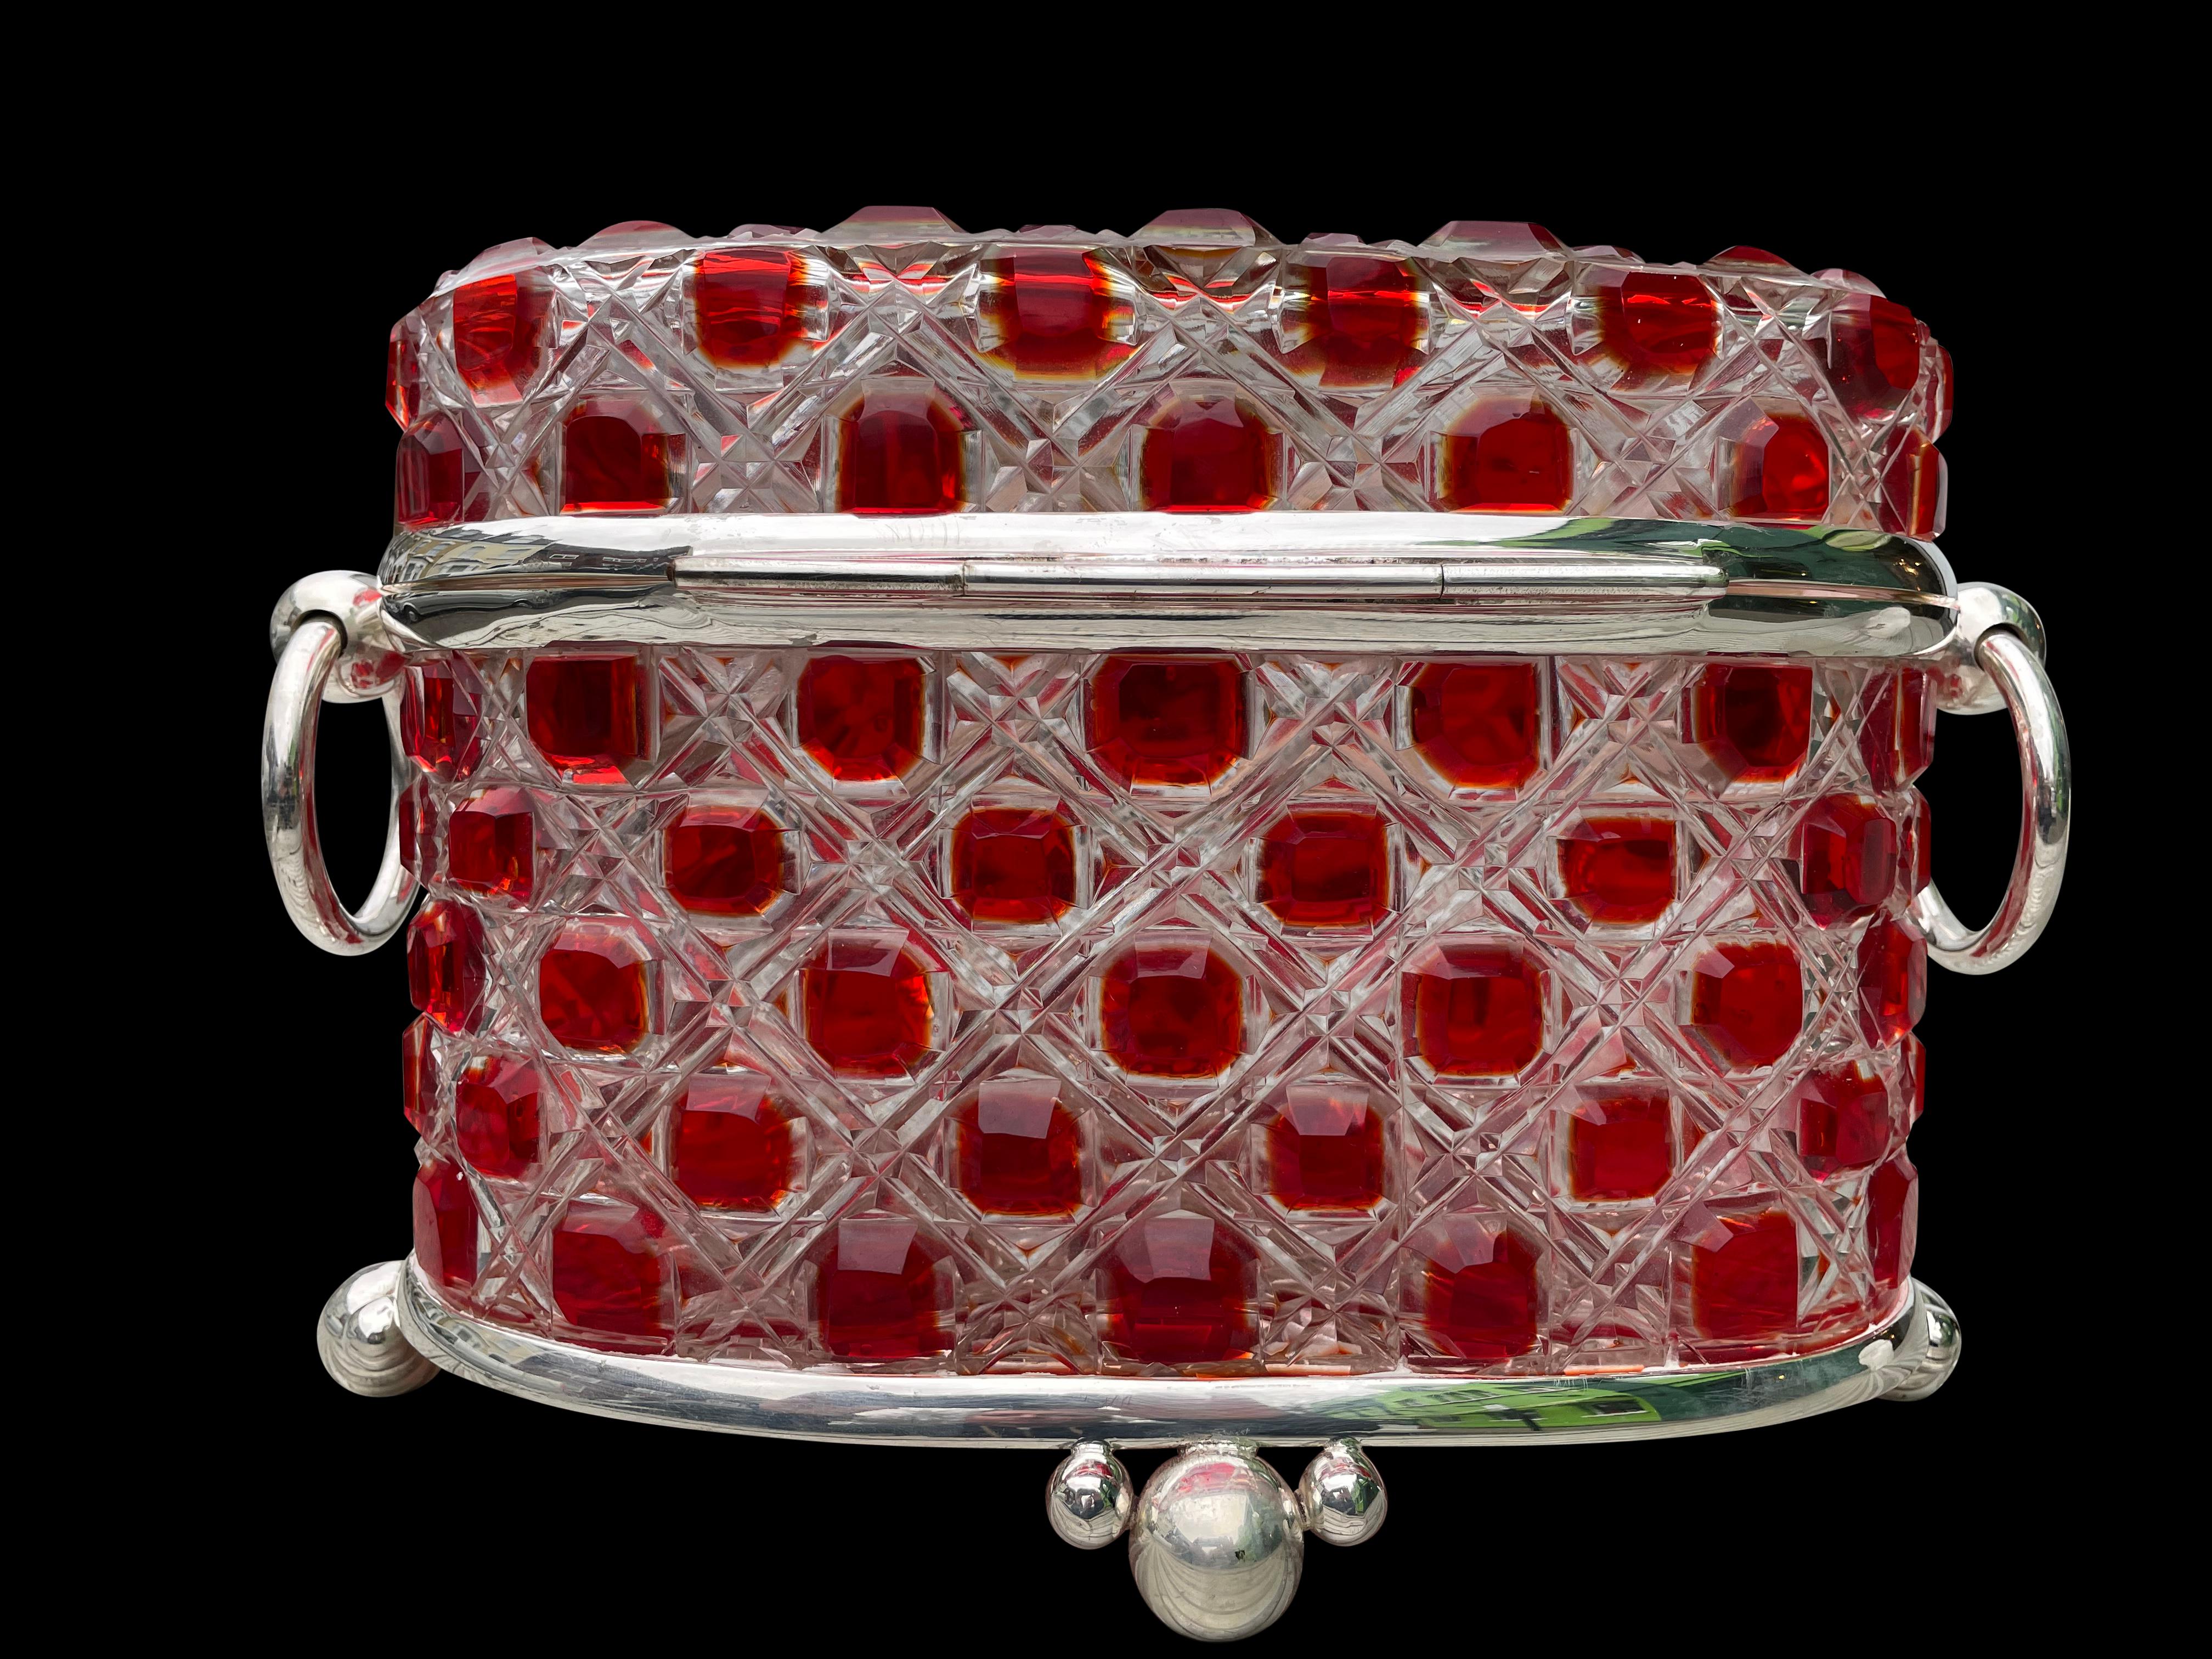 A stunning silver plate cut glass jewelry casket case box, 20th century. Love the intricately handcut glass with red designs. Silver plate has a lovely bright patina. Great collectors piece as well as a nice decorative item to display.